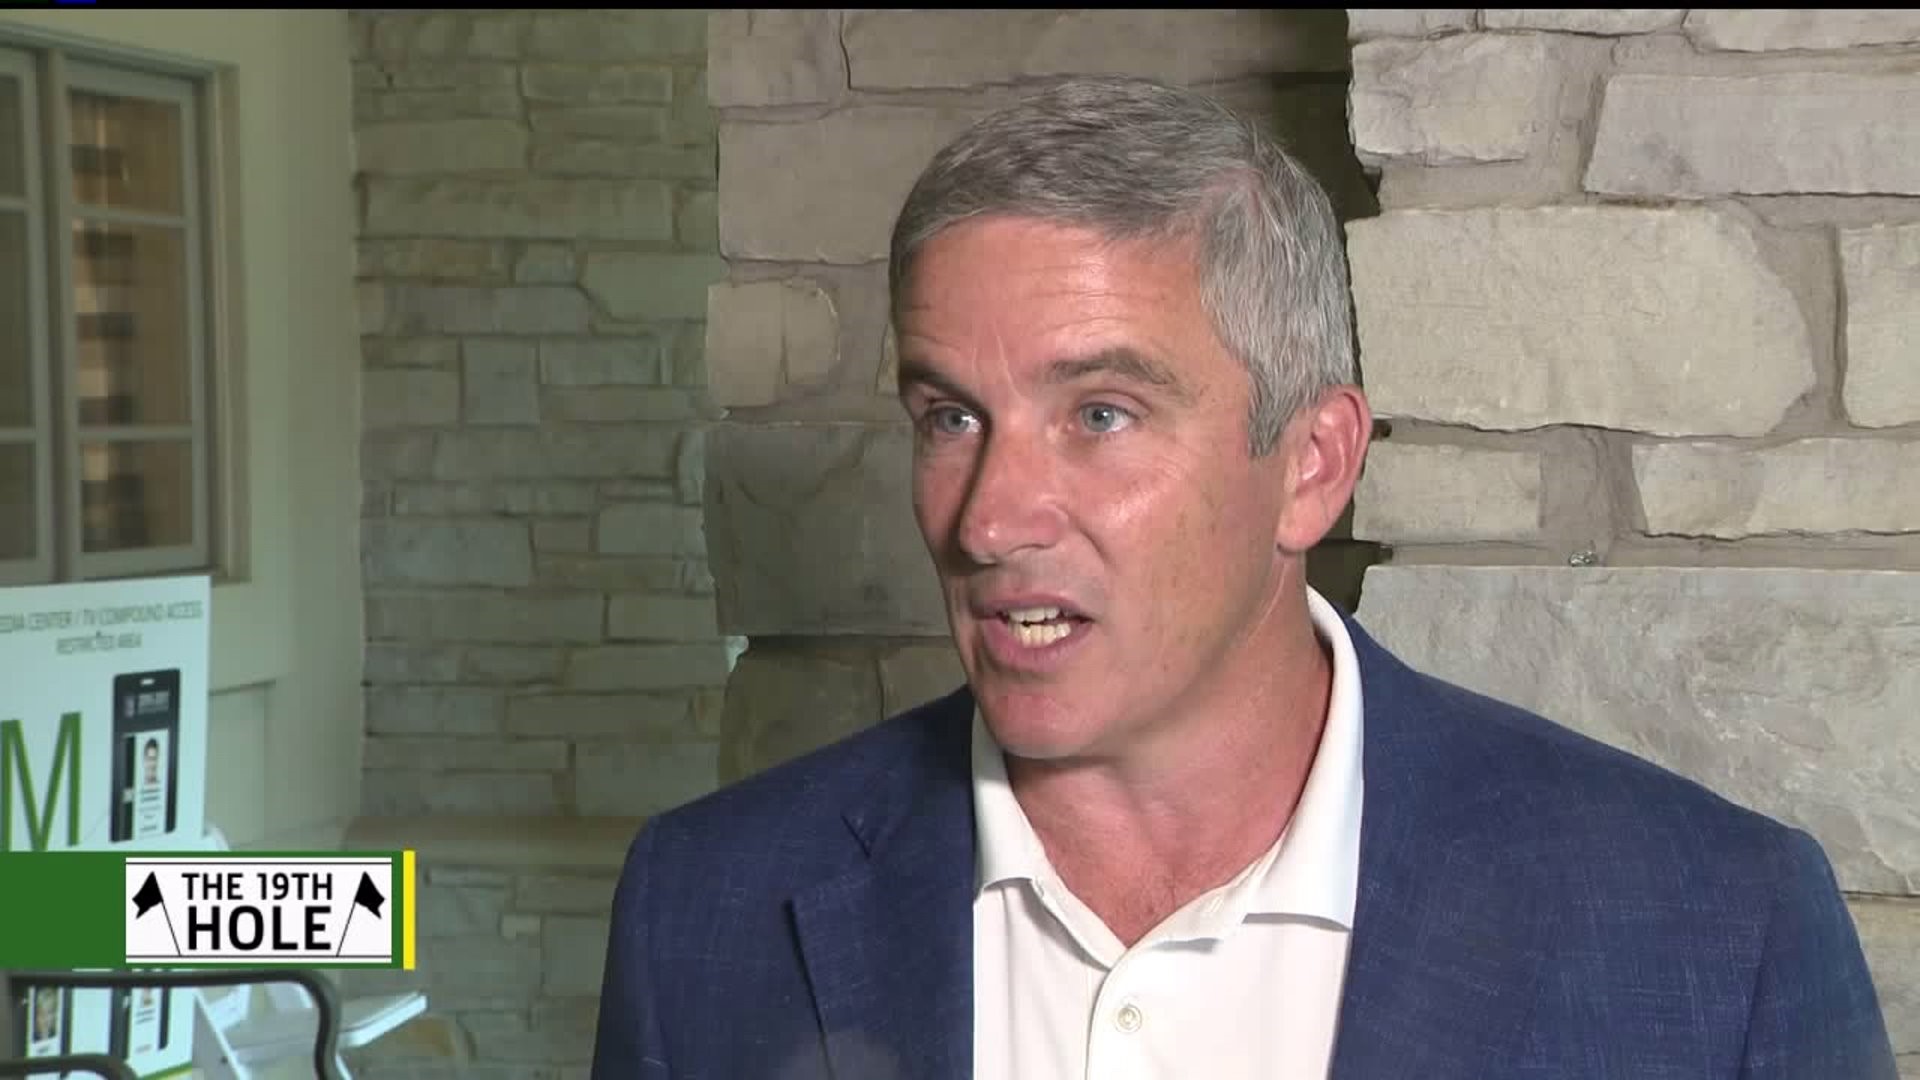 PGA Tour Commissioner shares his thoughts on the John Deere Classic